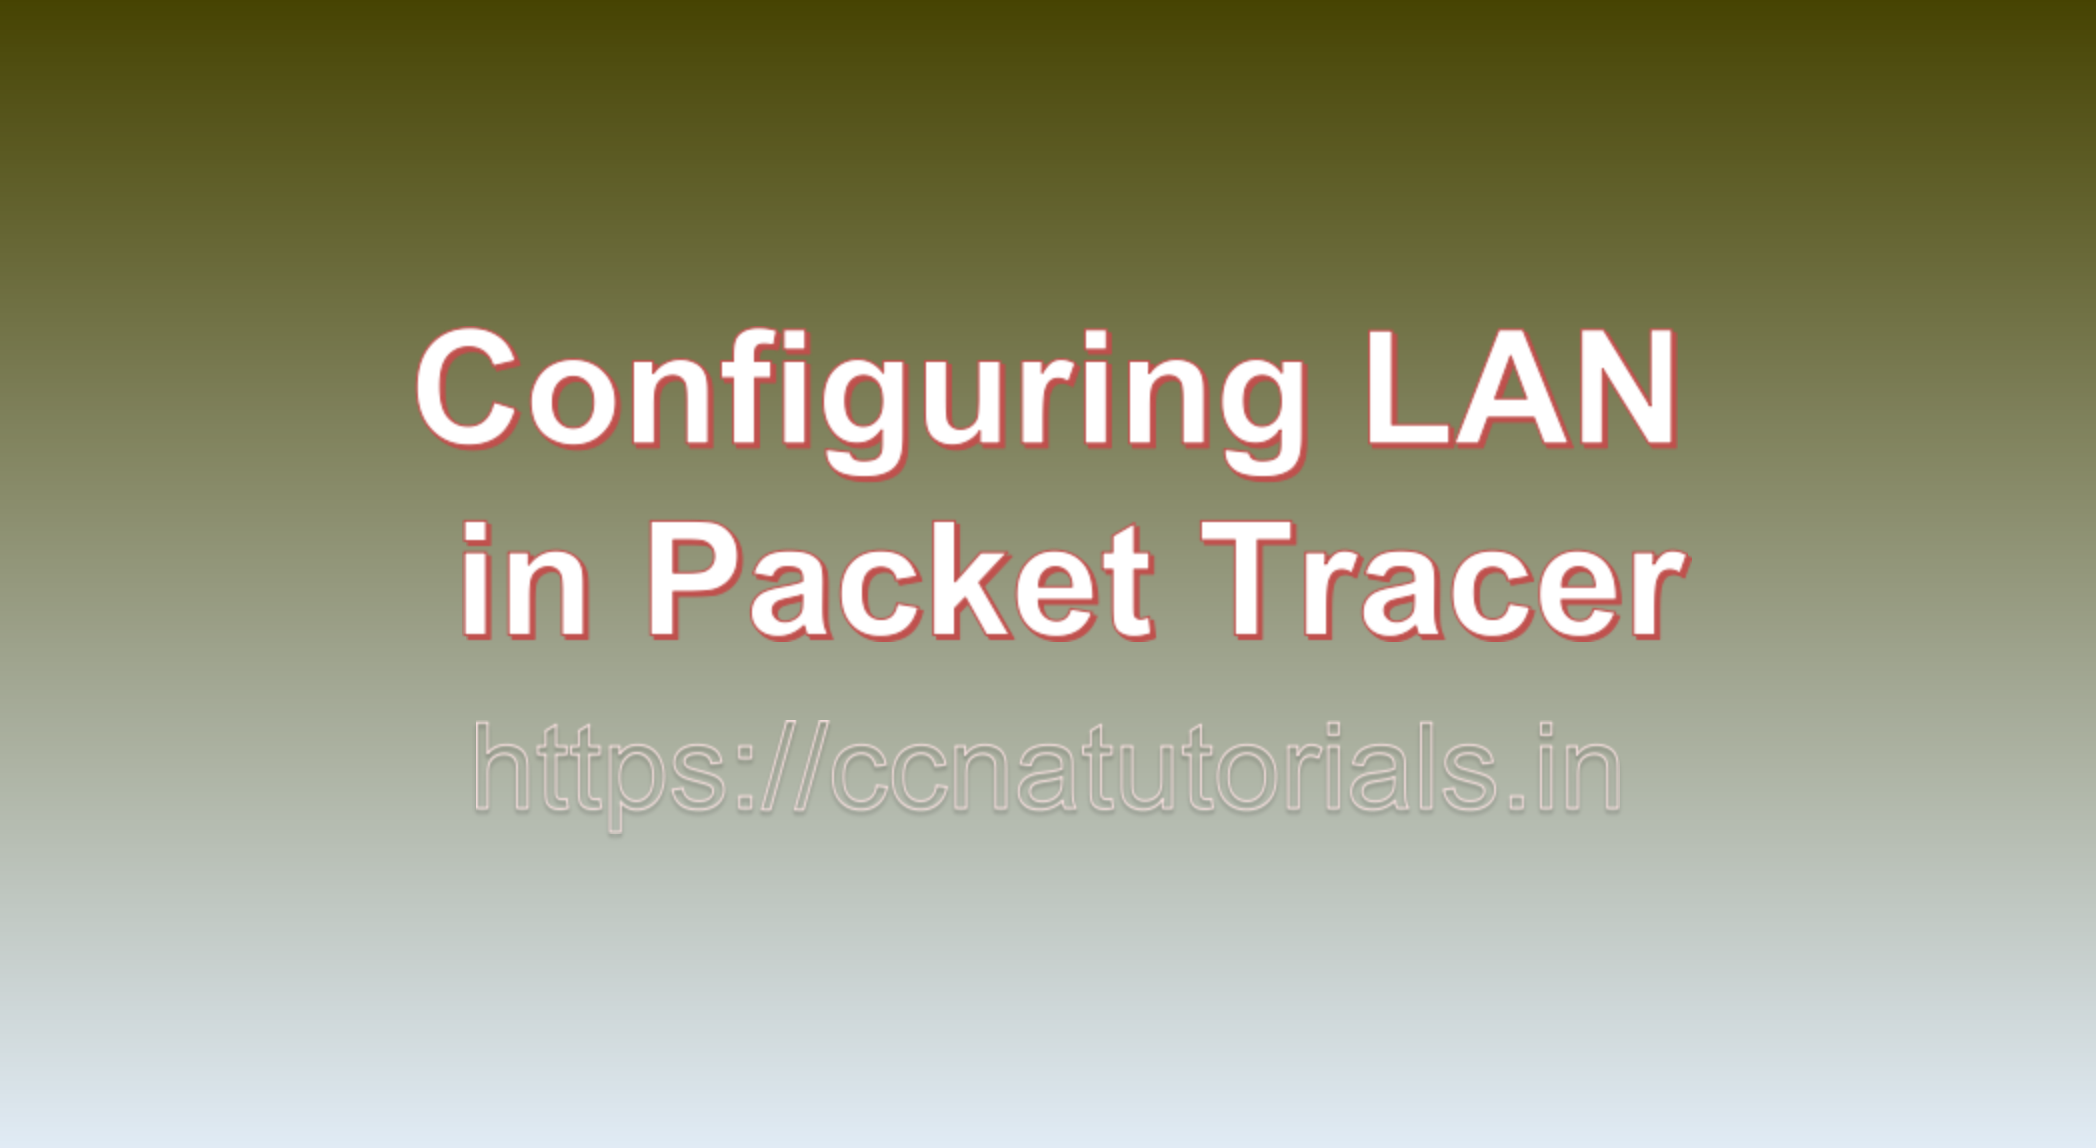 Configuring LAN in Packet Tracer, ccna, ccna tutorial